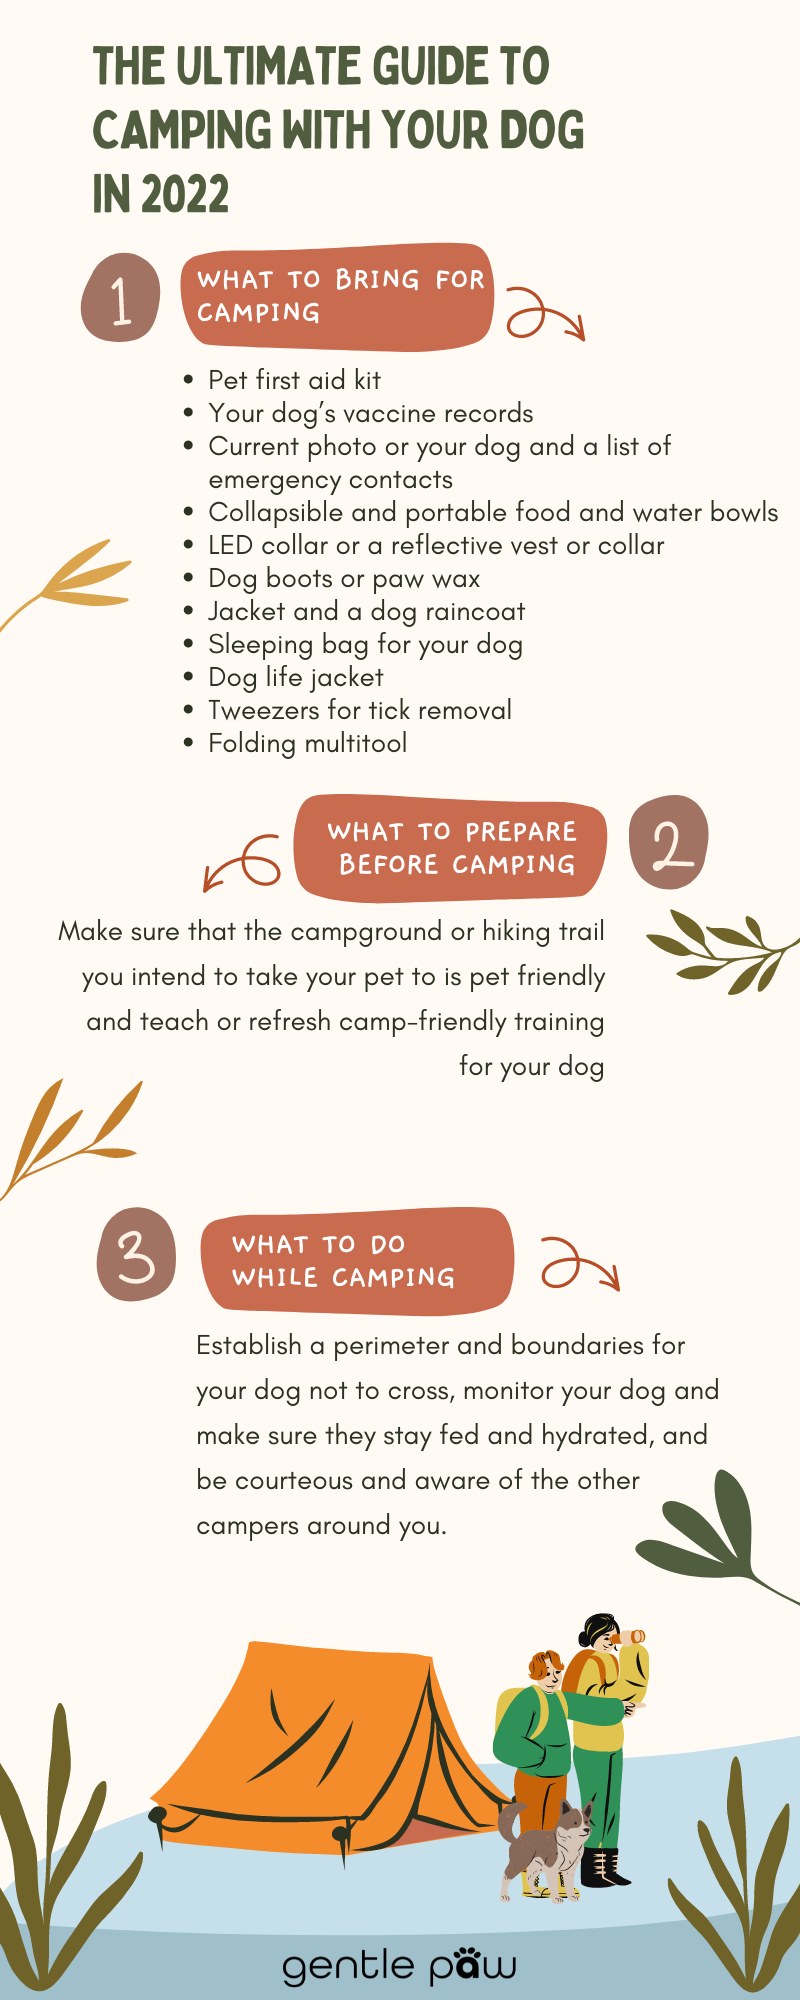 The Ultimate Guide To Camping With Your Dog In 2022 Infographic